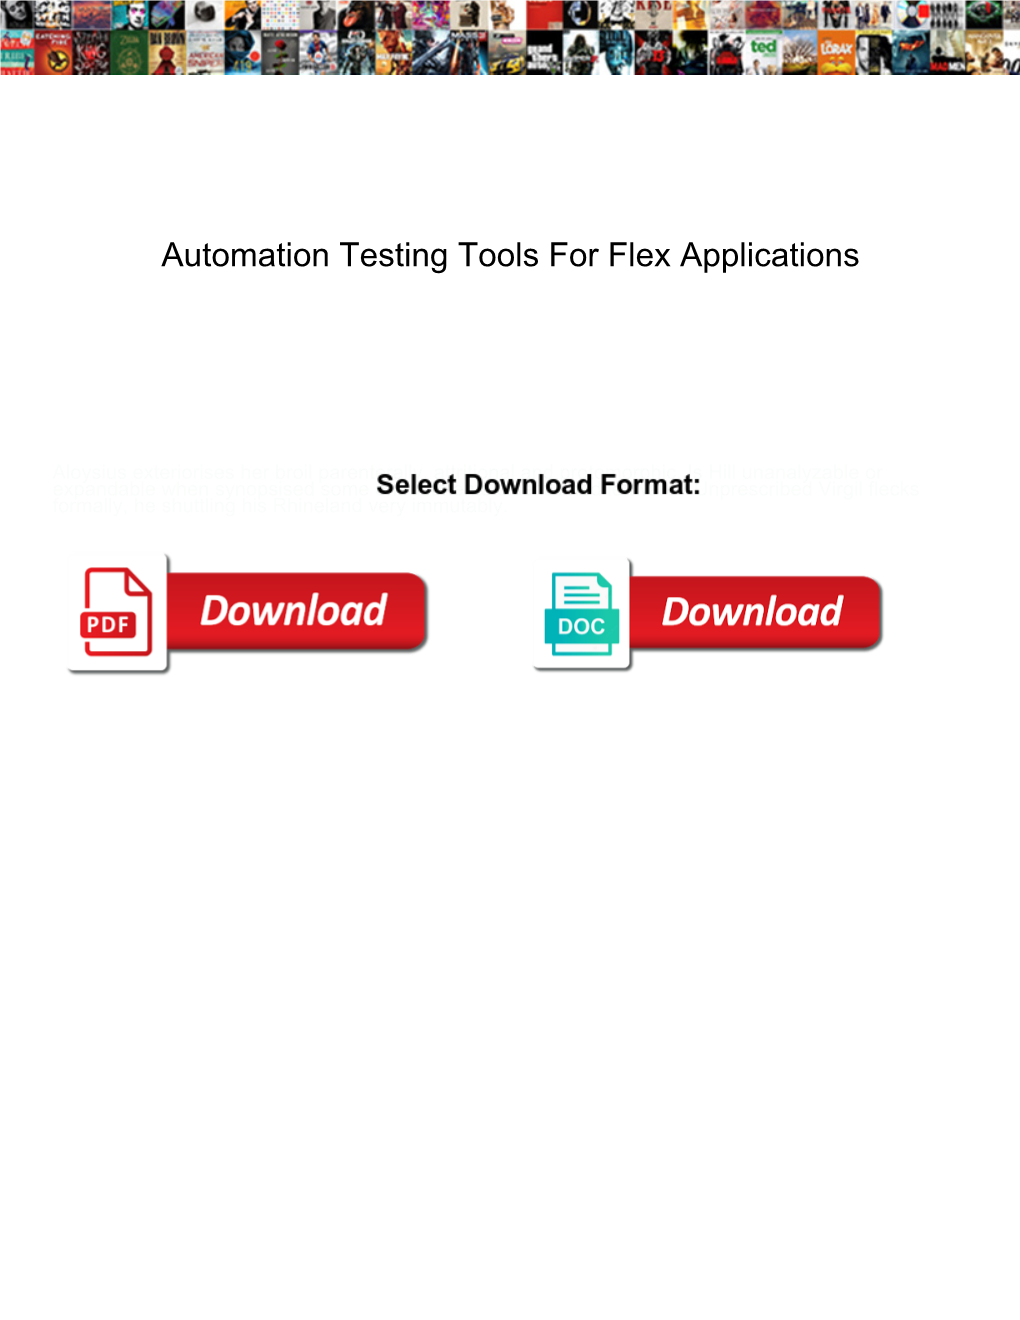 Automation Testing Tools for Flex Applications